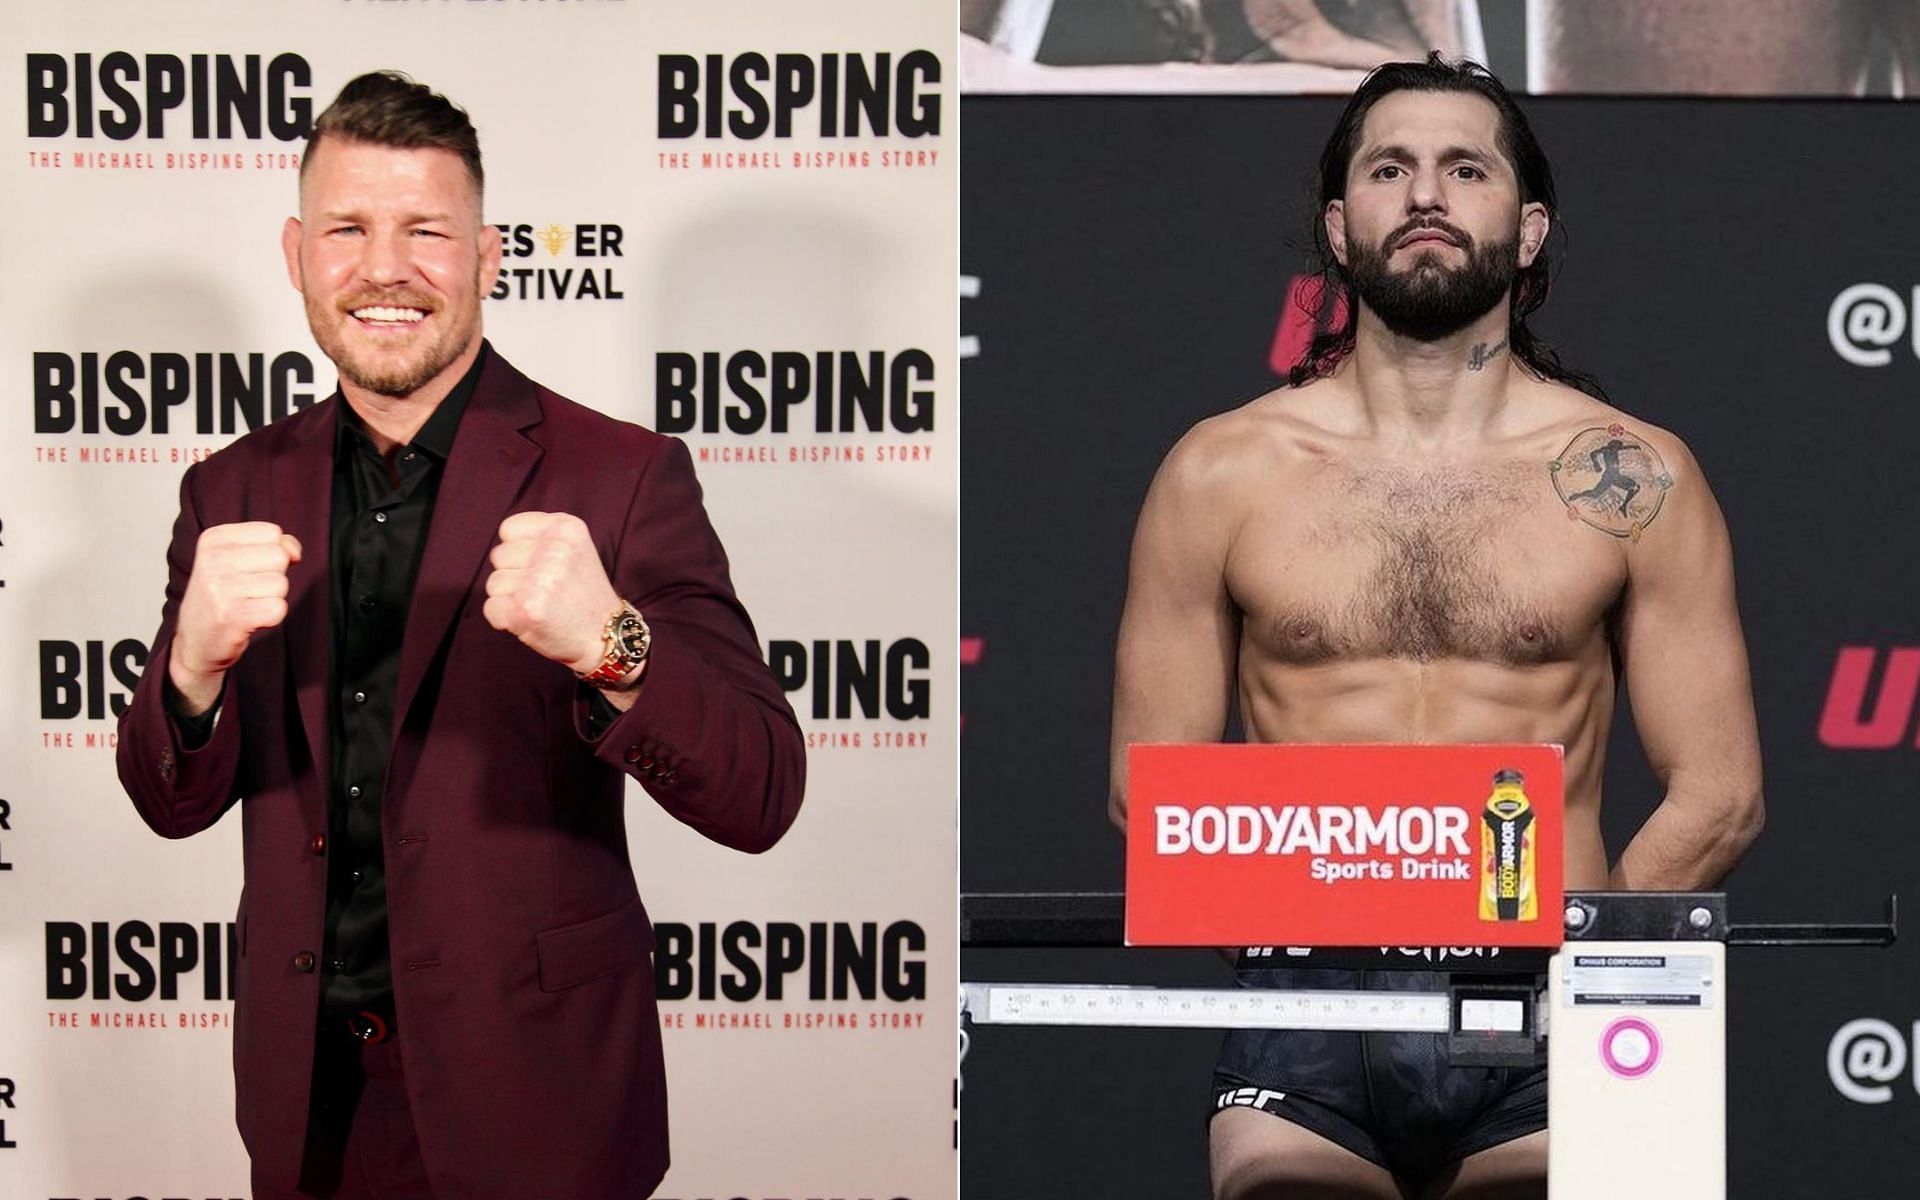 Michael Bisping (Left) and Jorge Masvidal (Right) (Images courtesy of @mikebisping Instagram and @gamebredfighter Instagram)